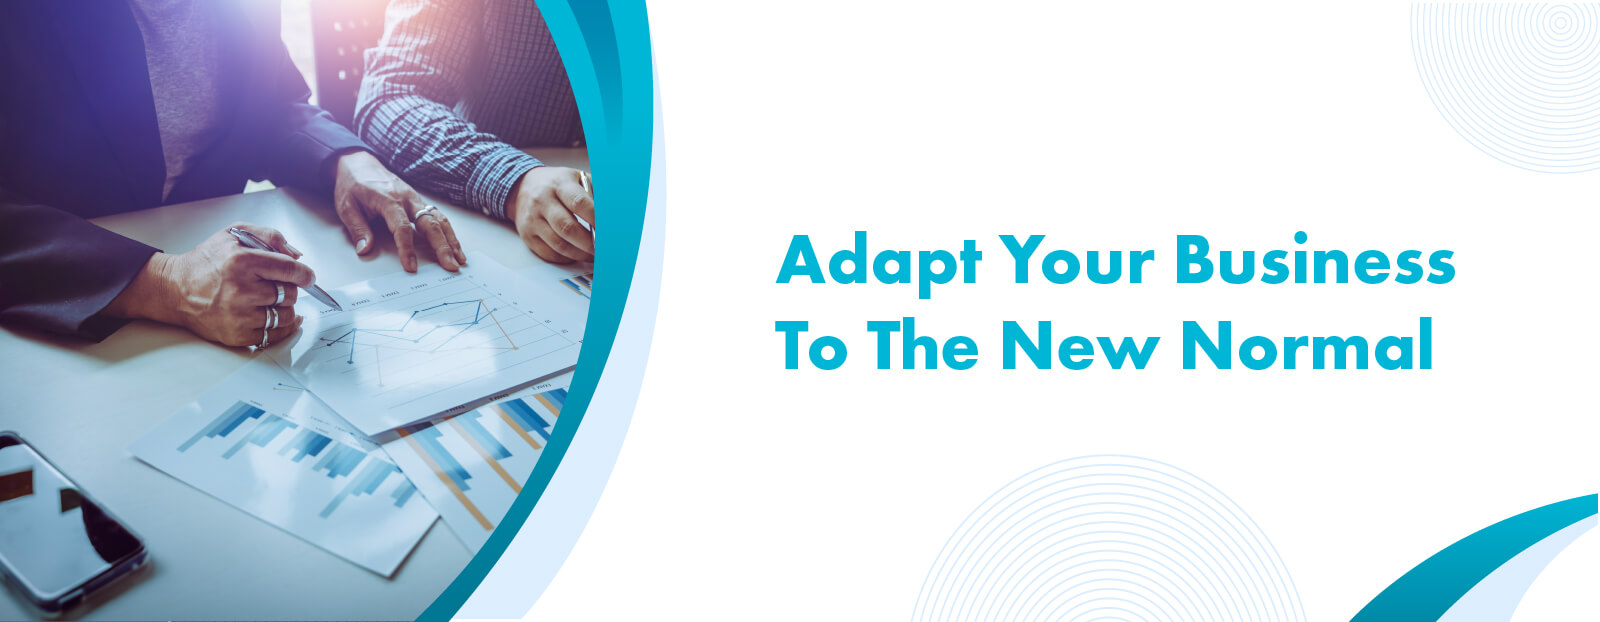 Adapt Your Business To The New Normal